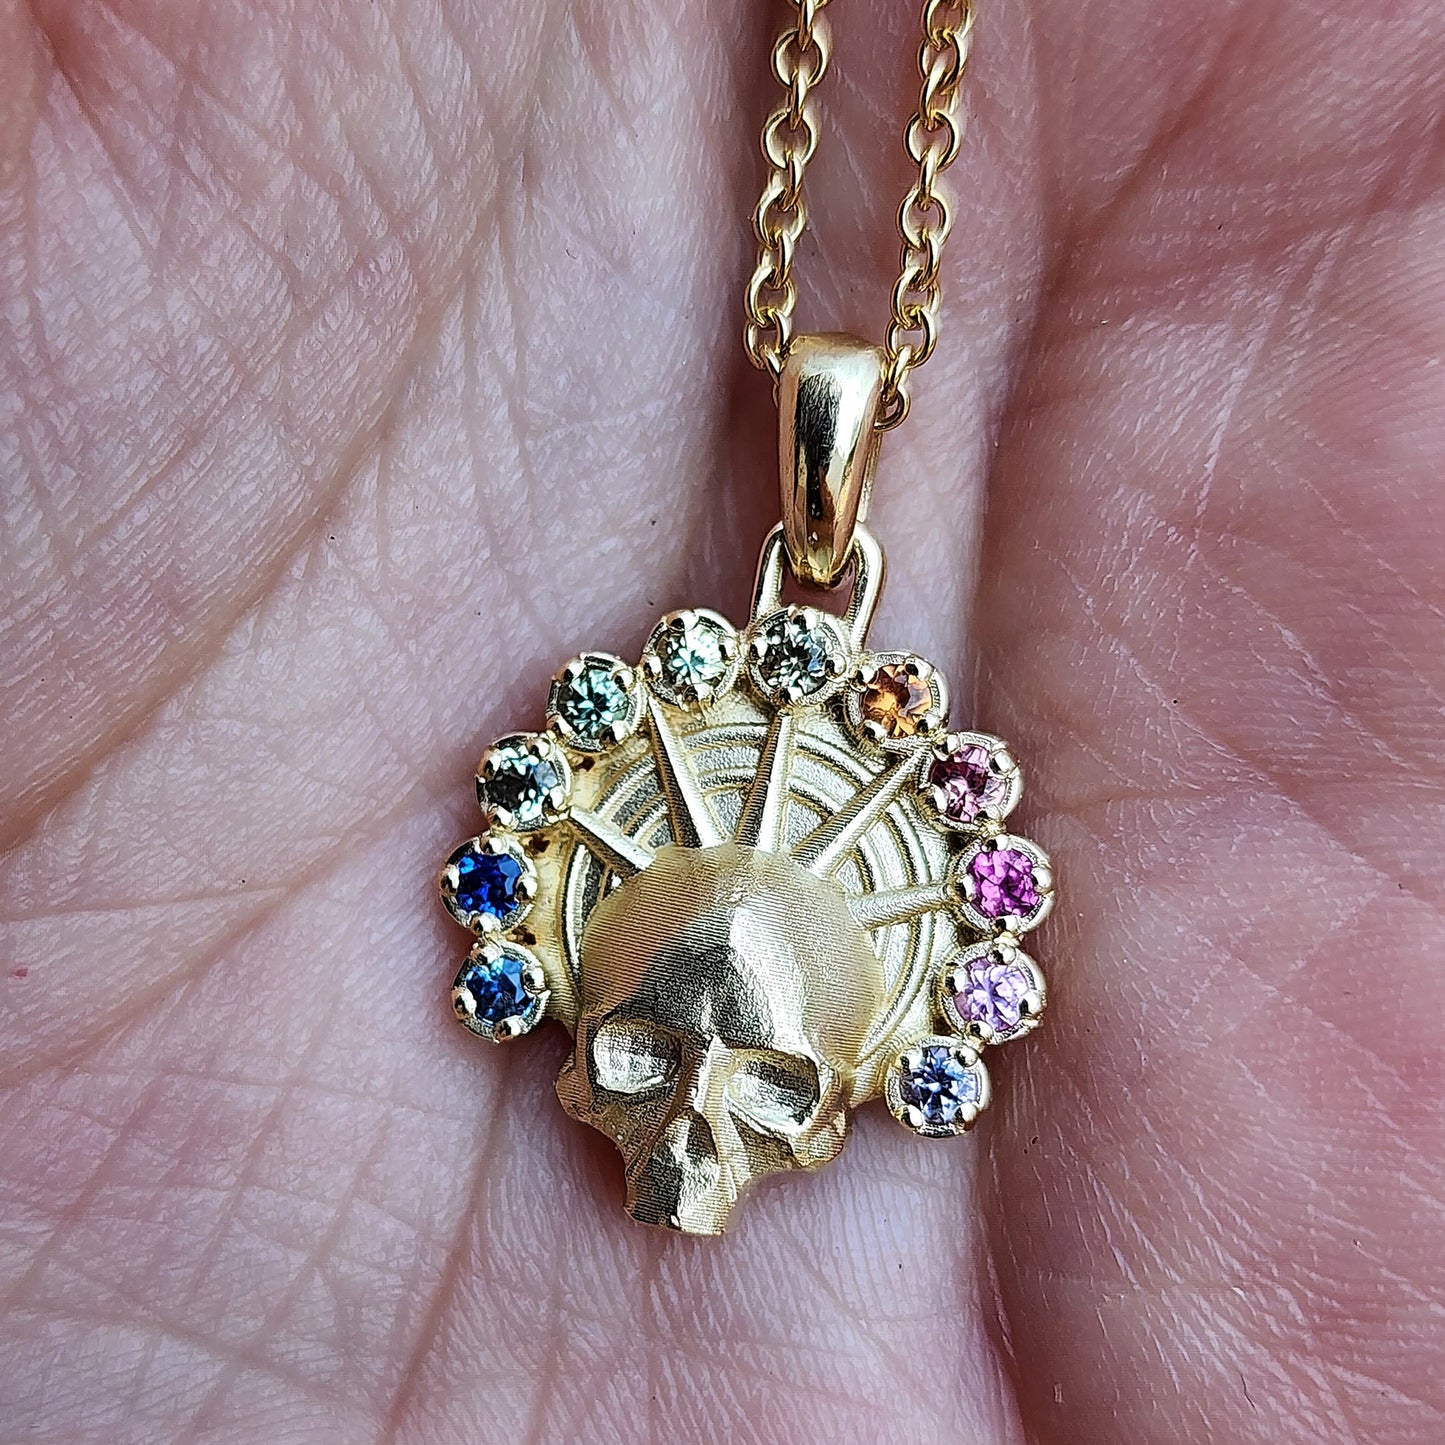 Rainbow Aura Angel Pendant - Catacomb Memento Mori Gold Skull Necklace with Natural Sapphires - Gothic Fine Jewelry